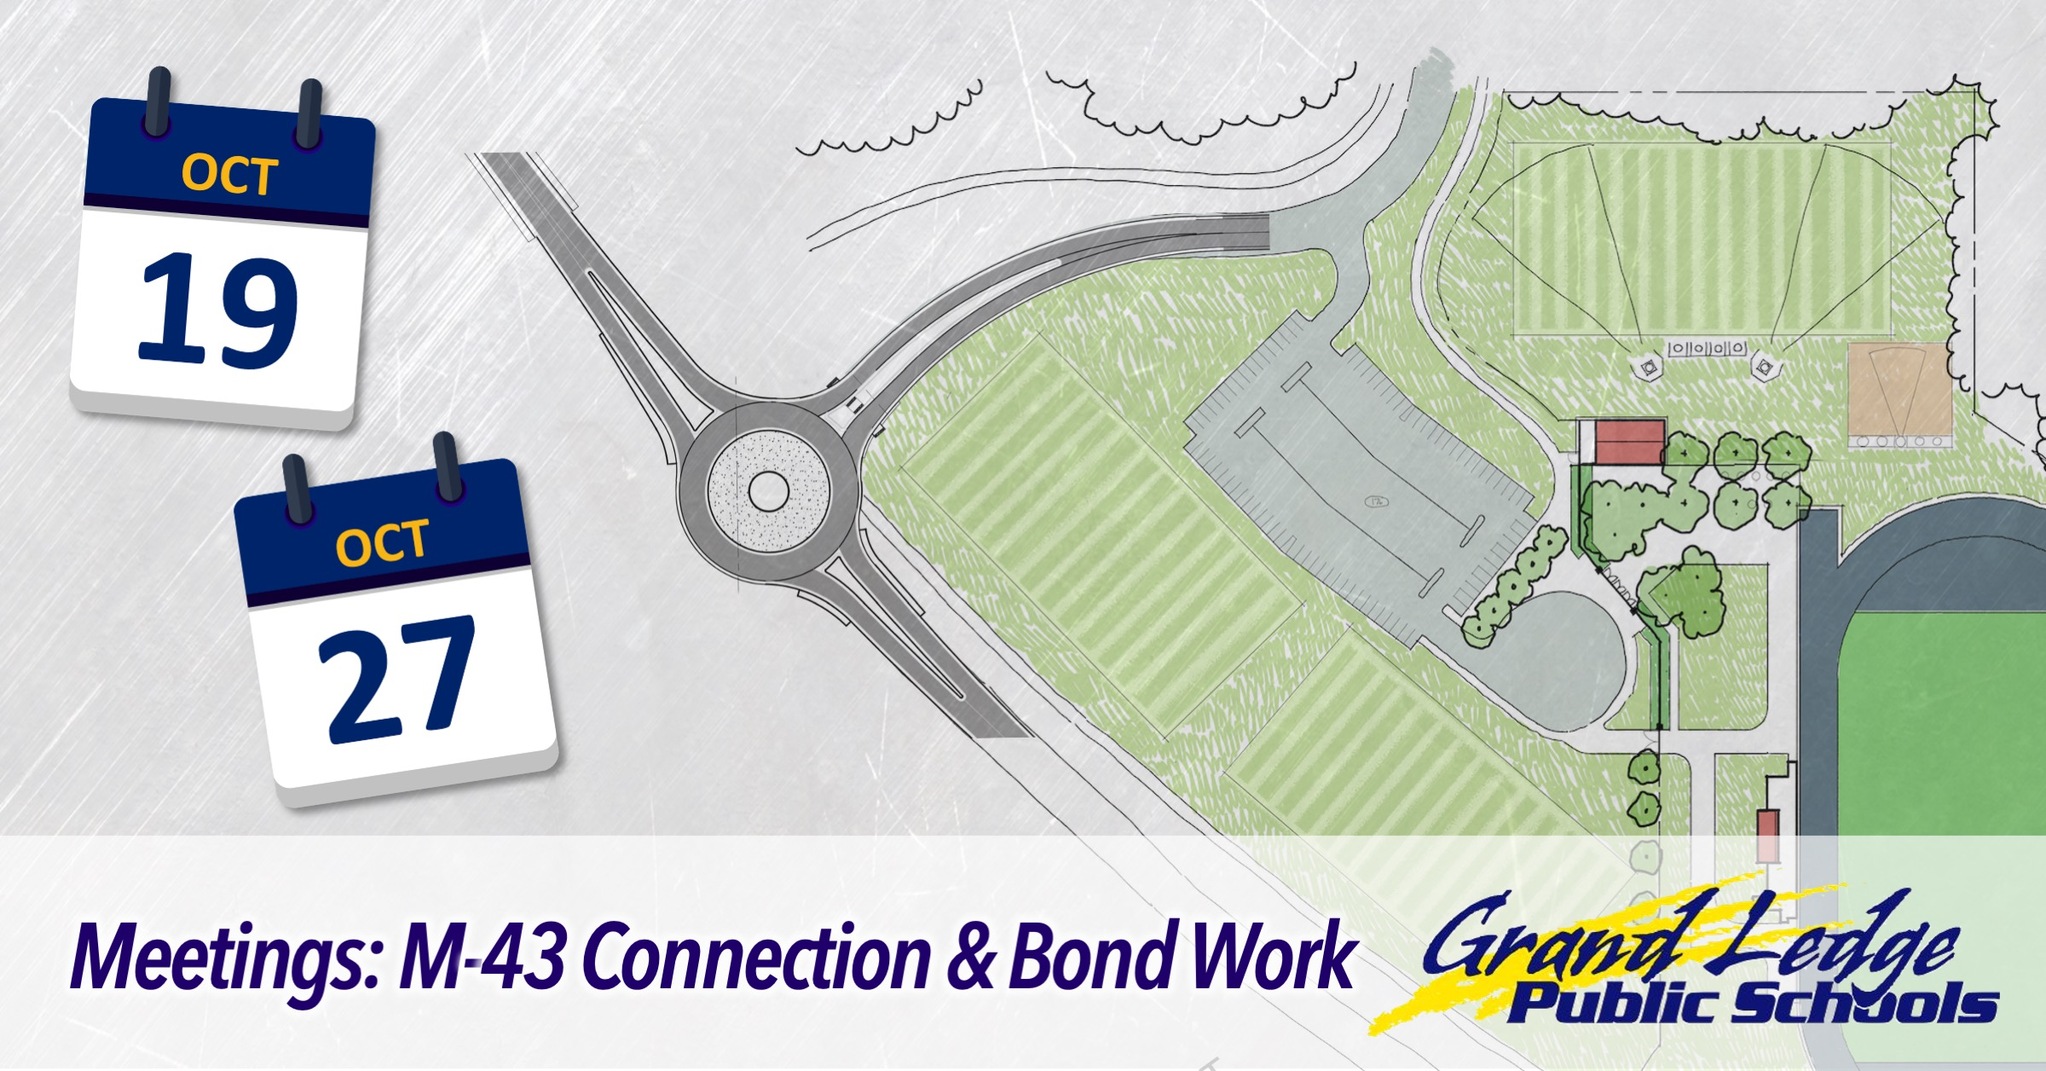 Meetings about M-43 Connection and Bond Work